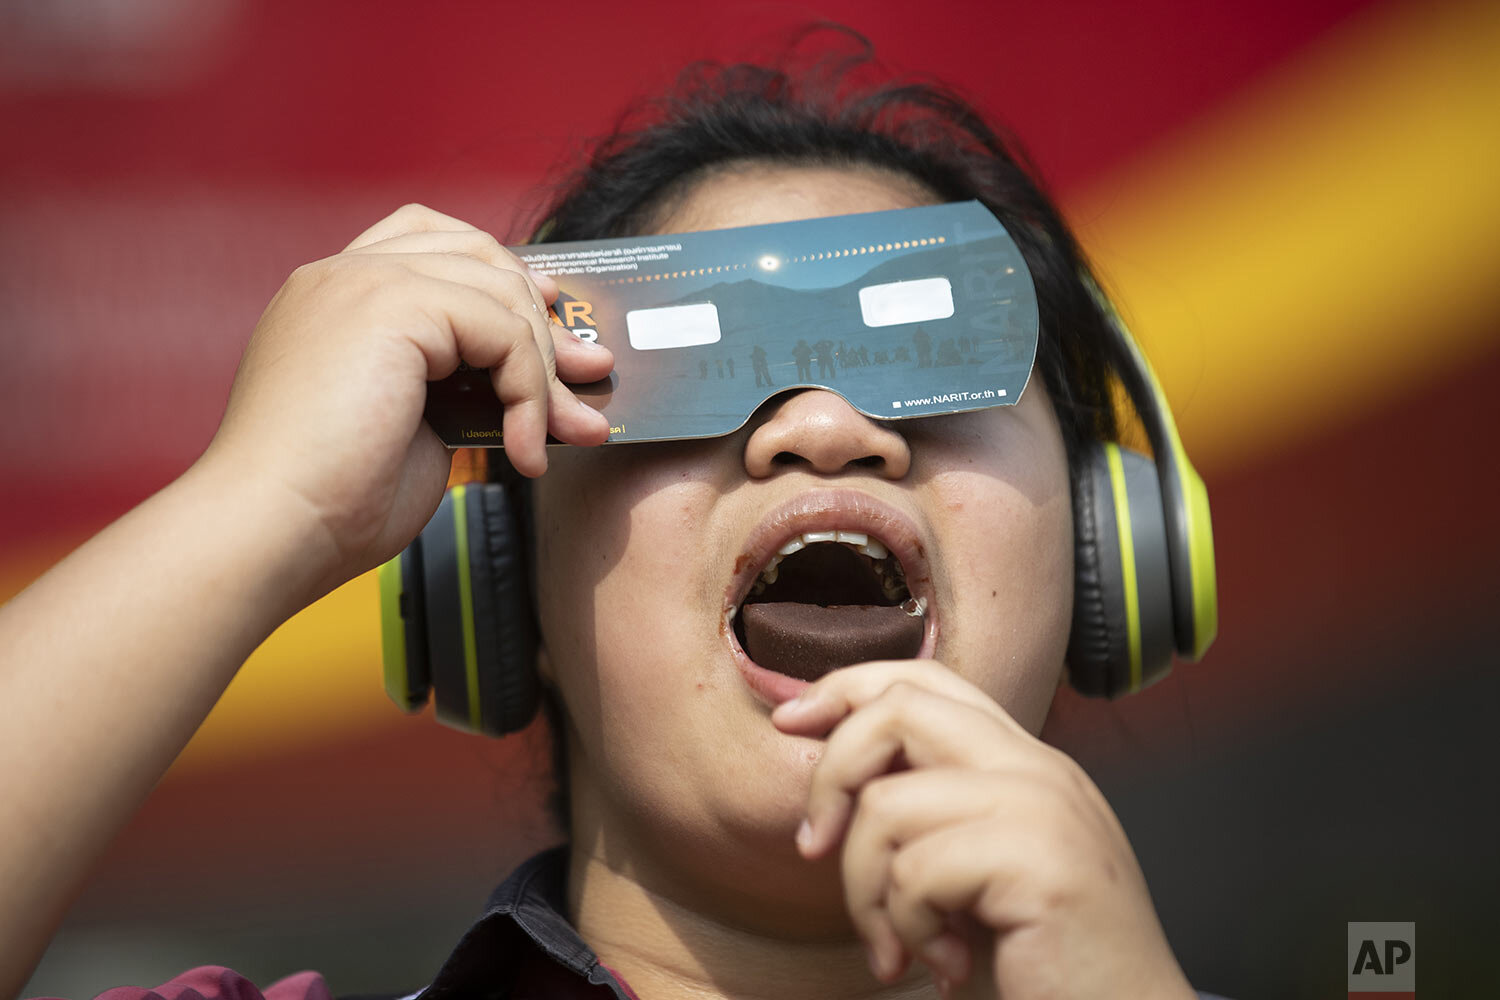  A student holds a special filter to observe a solar eclipse while eating an ice cream treat at a school in Bangkok, Thailand, Thursday, Dec. 26, 2019. (AP Photo/Sakchai Lalit) 